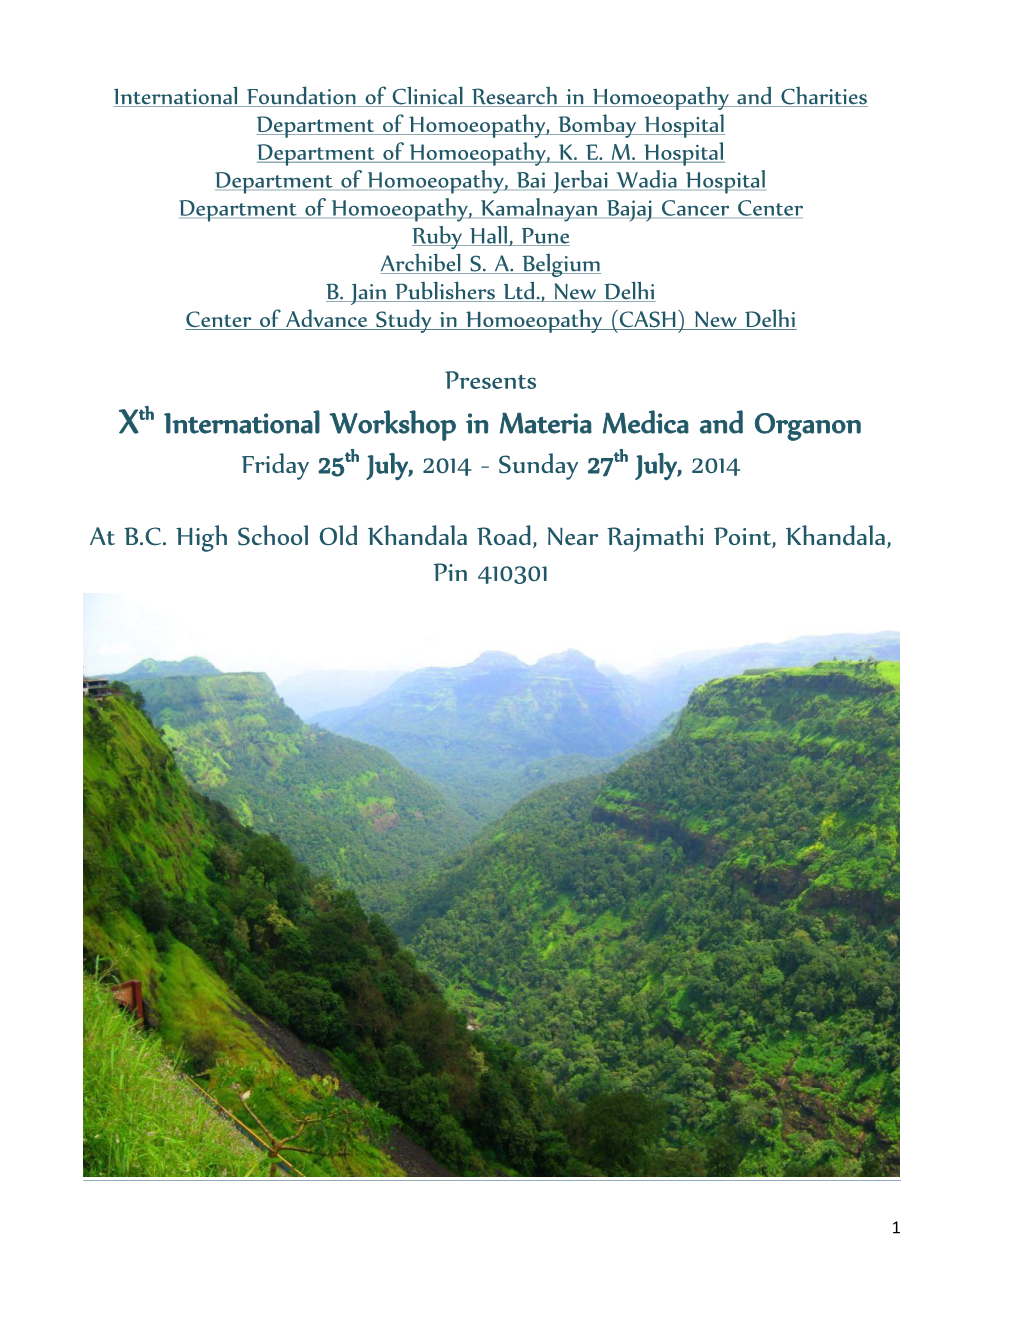 Xth International Workshop in Materia Medica and Organon Friday 25Th July, 2014 - Sunday 27Th July, 2014